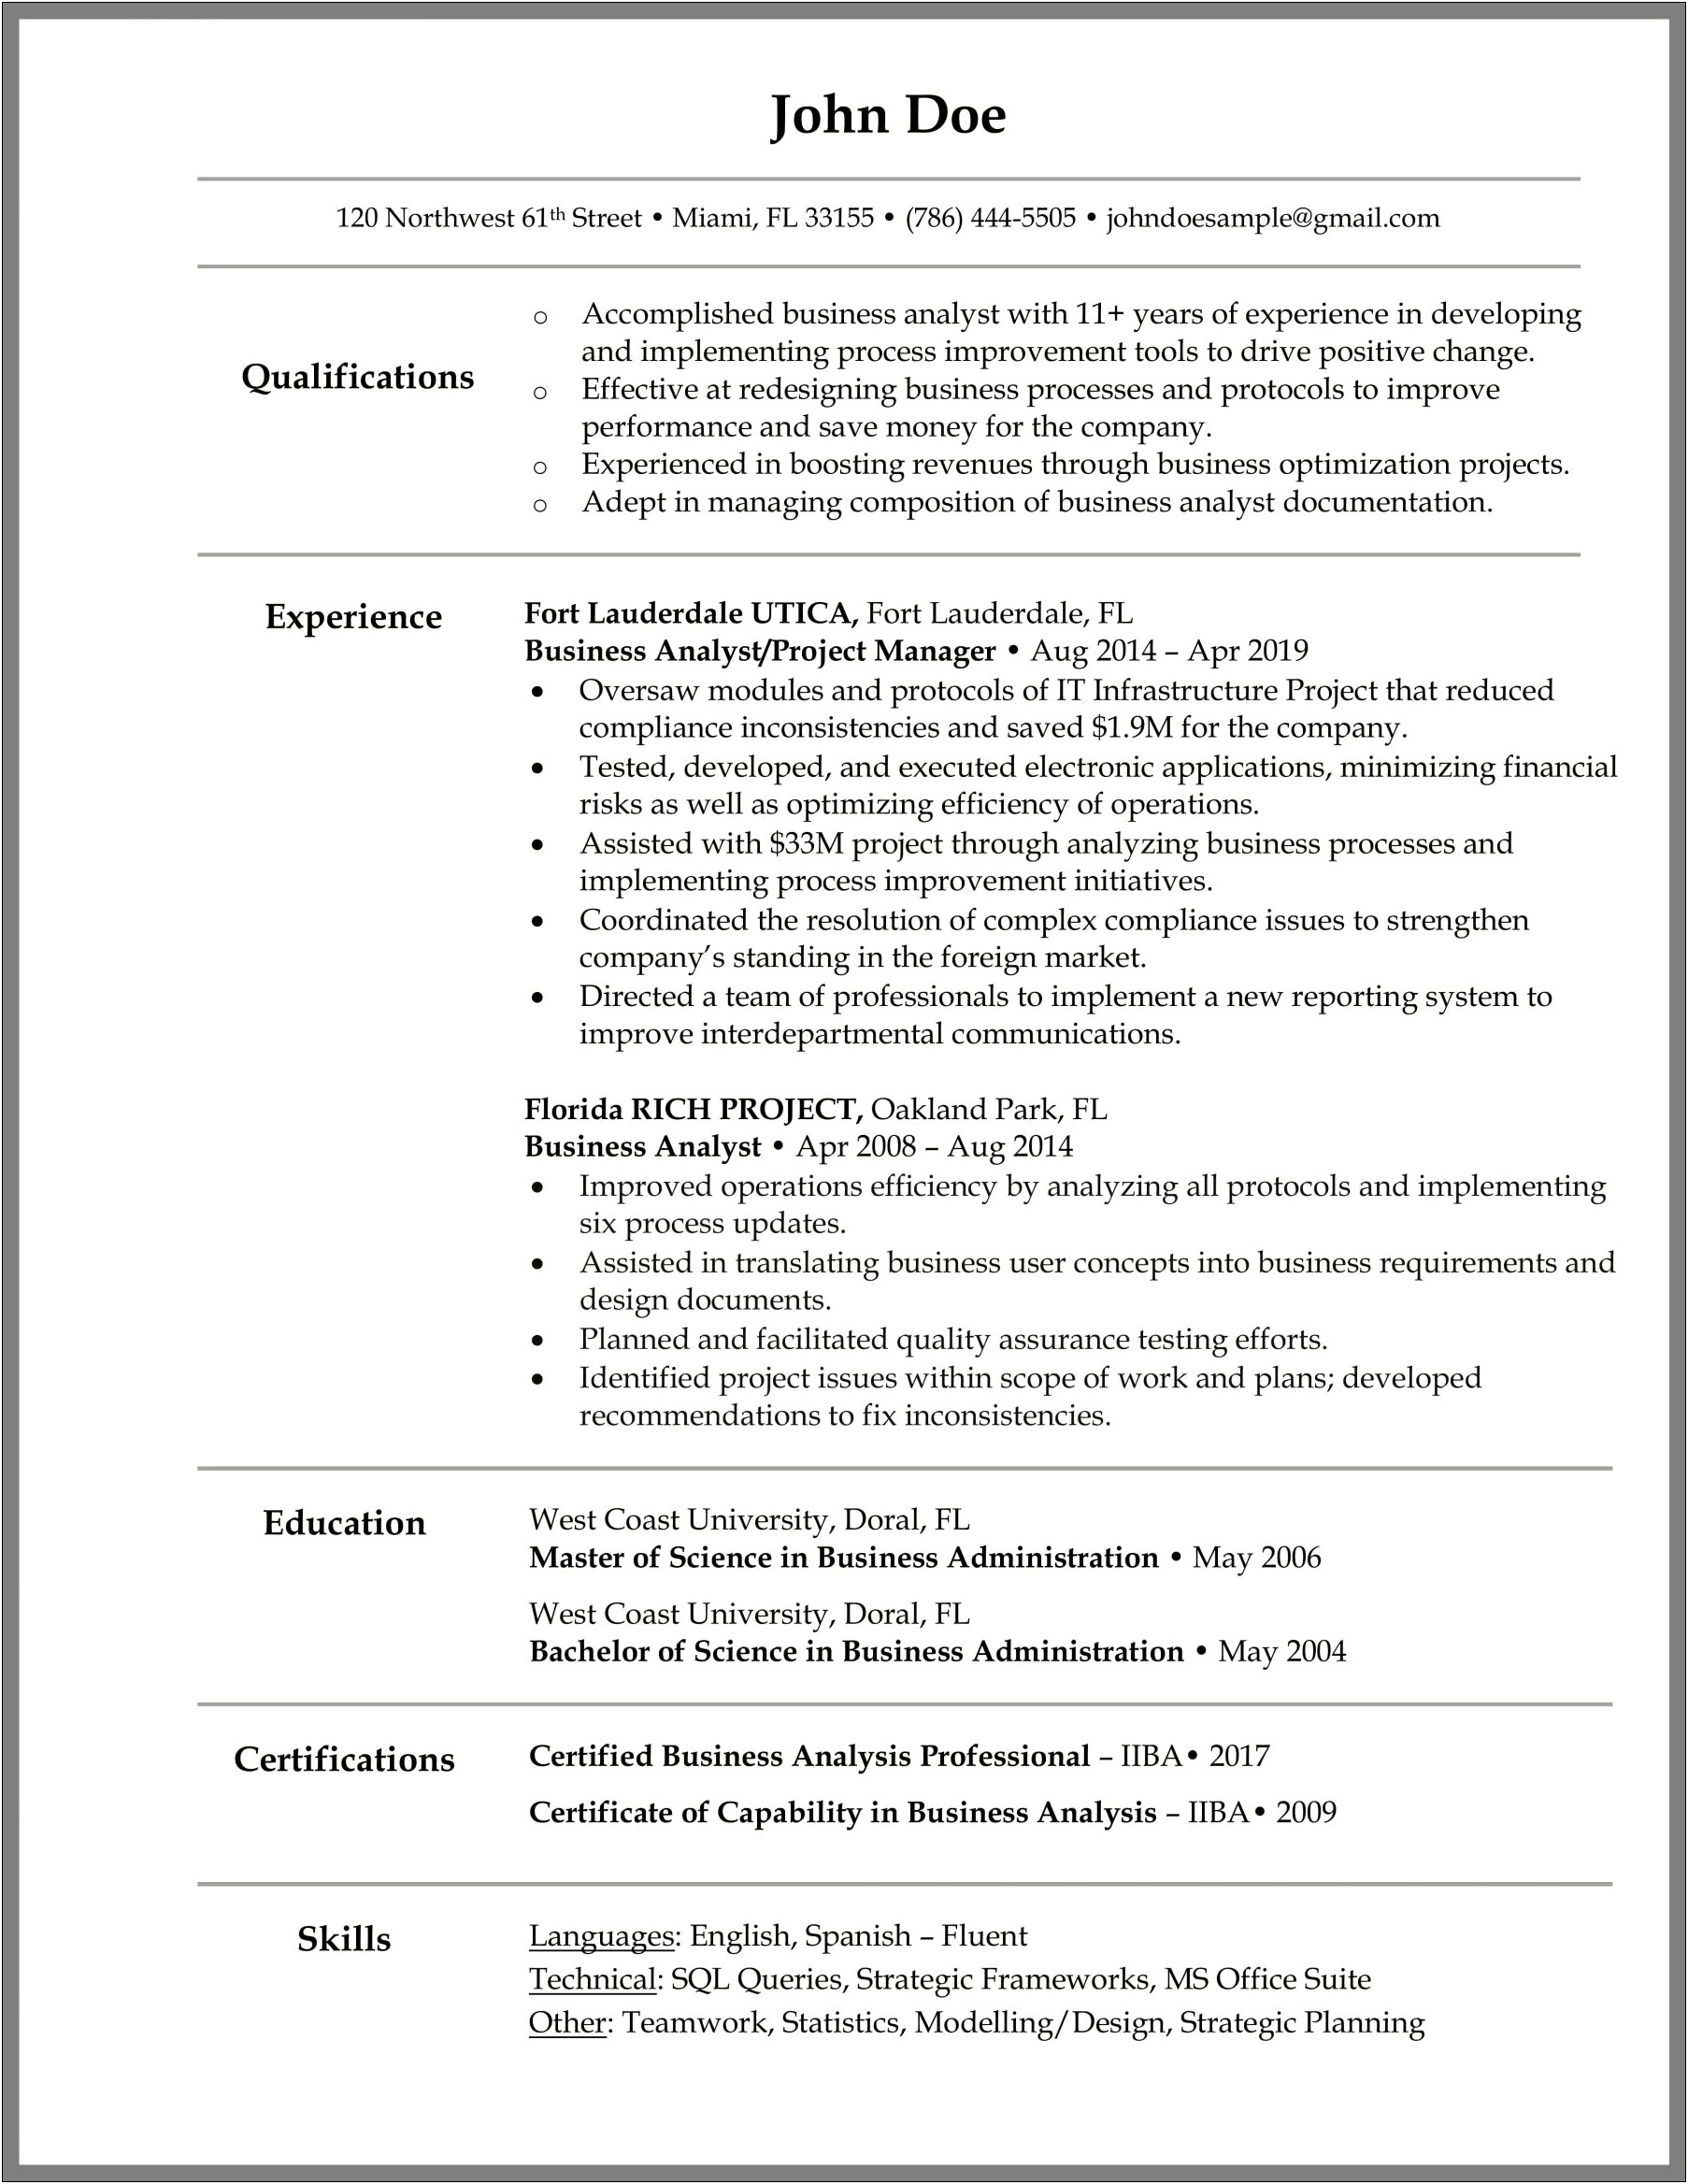 Job Summary For Business Analyst Resume